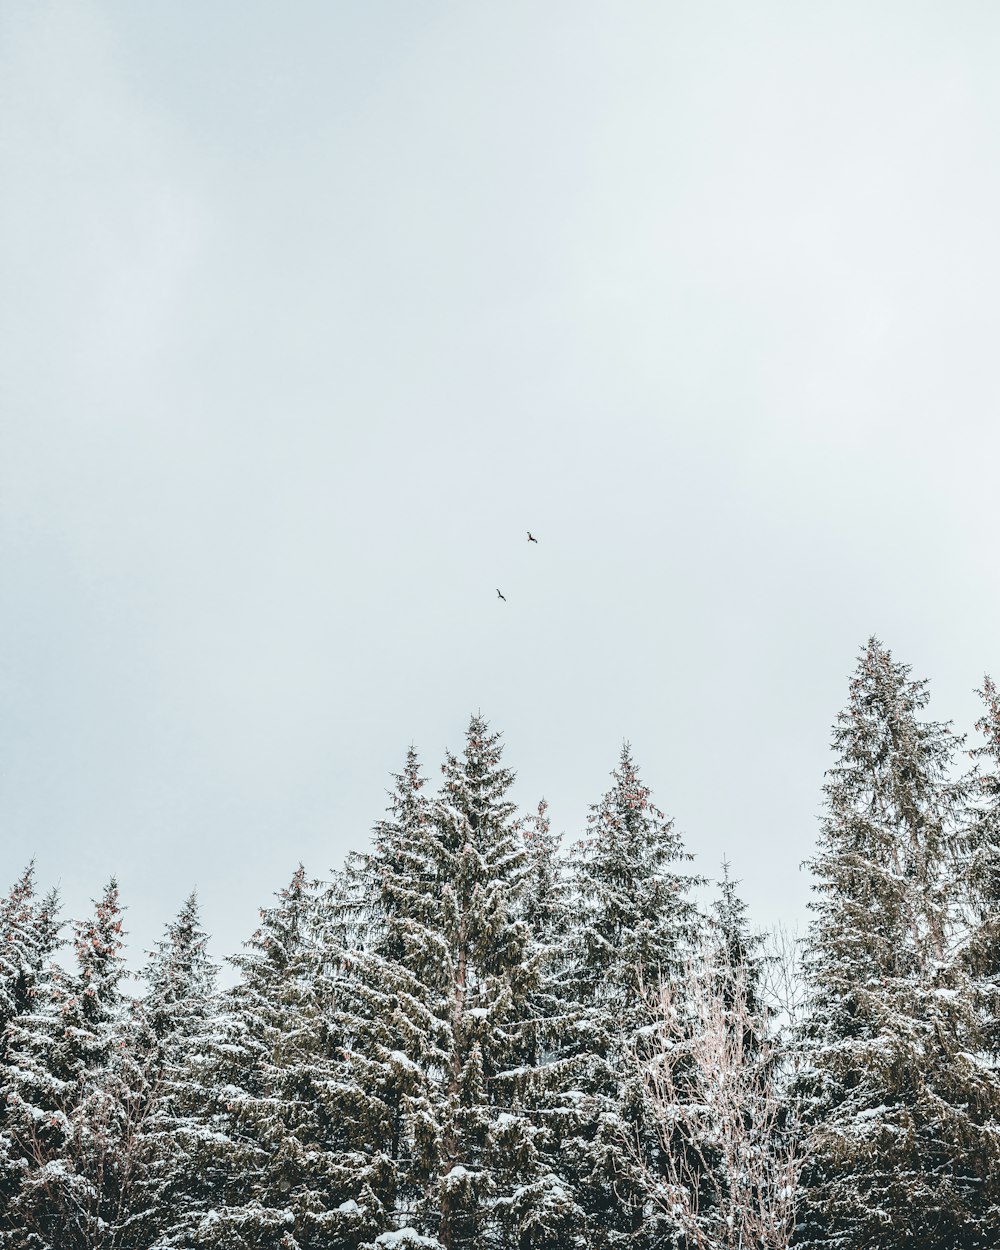 birds flying over snow covered pine trees